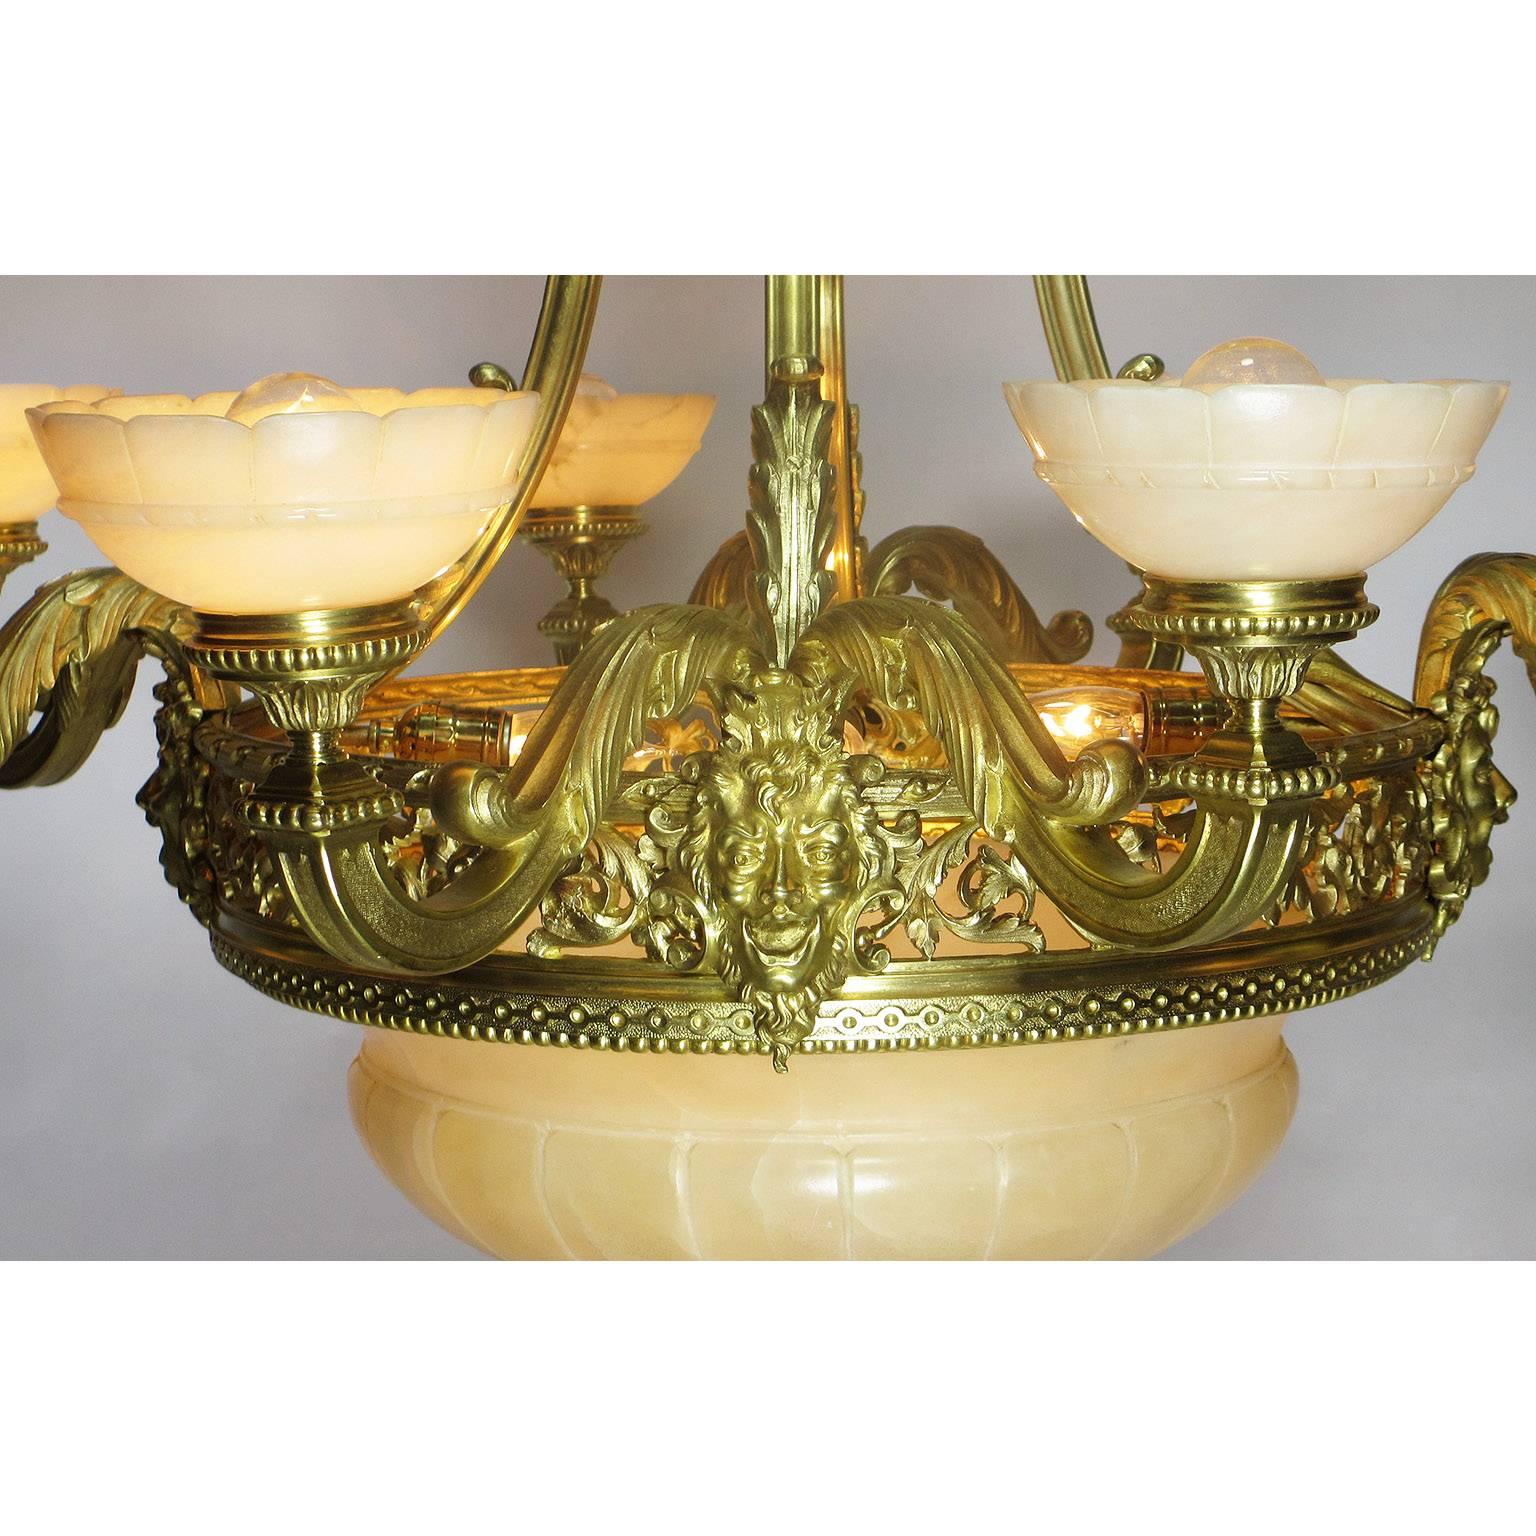 Carved French Art Deco Gilt Bronze and Veined Alabaster Eight-Light Figural Chandelier For Sale